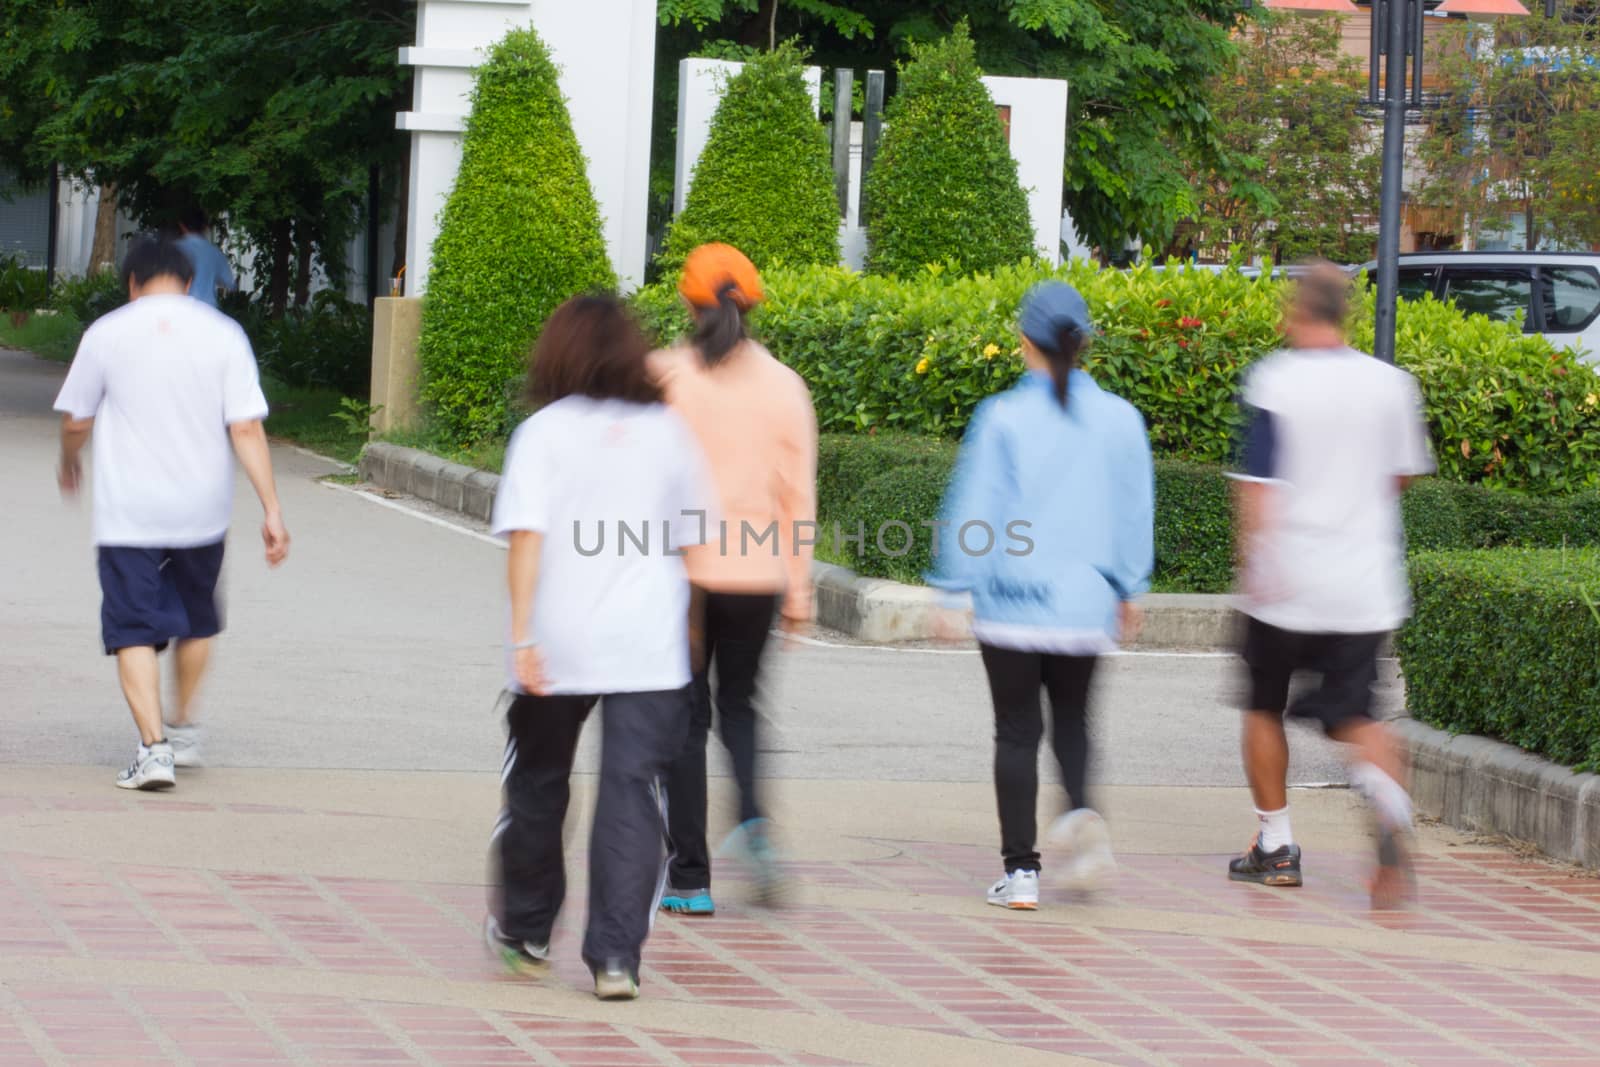 Blurred image of people walking in a park, outdoor exercise by a3701027